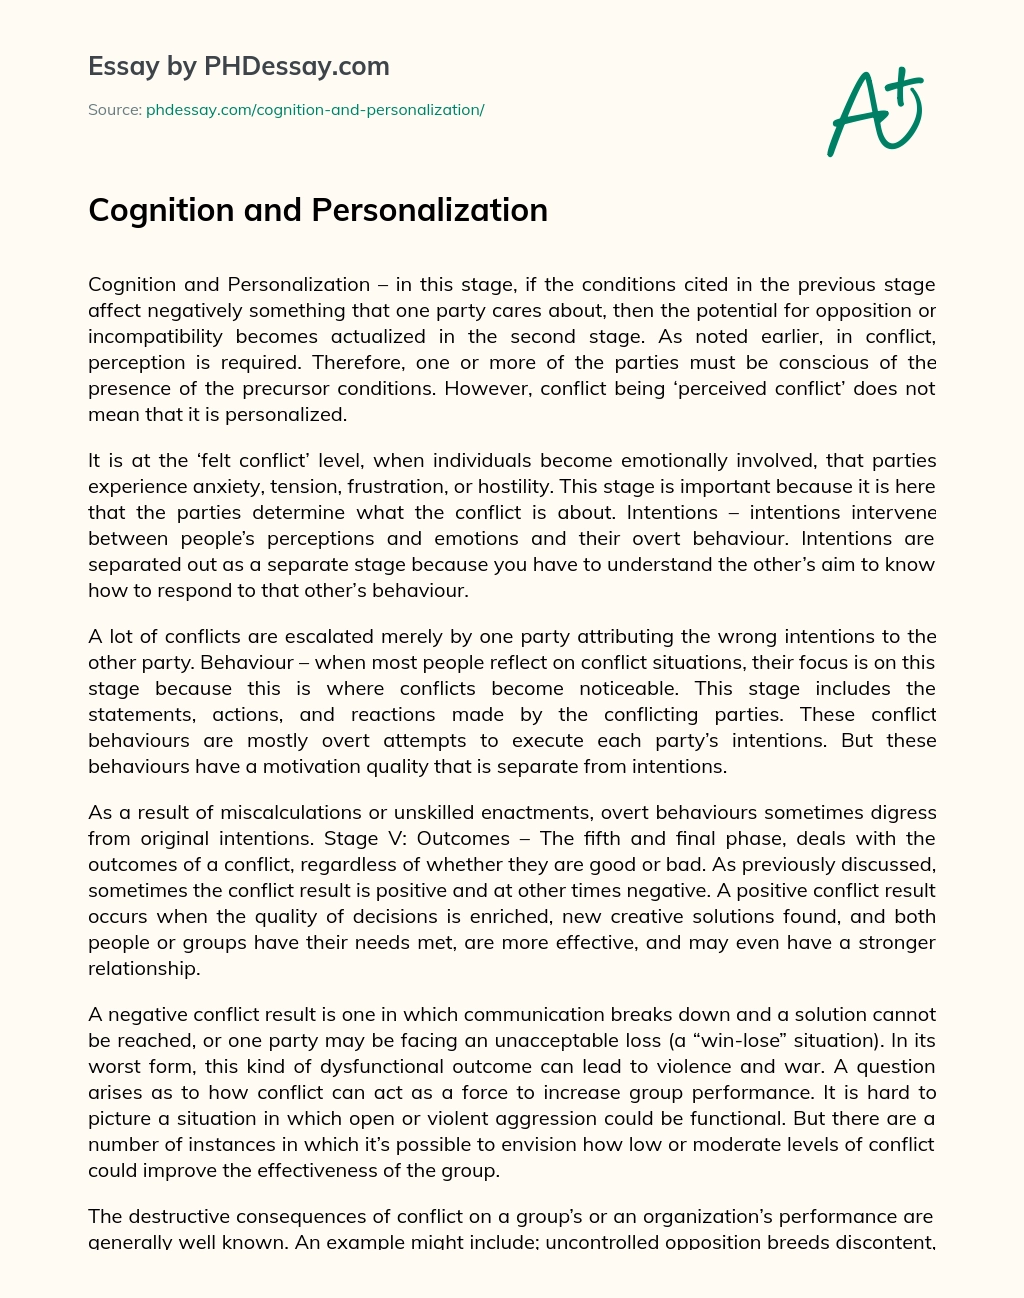 Cognition and personalization essay